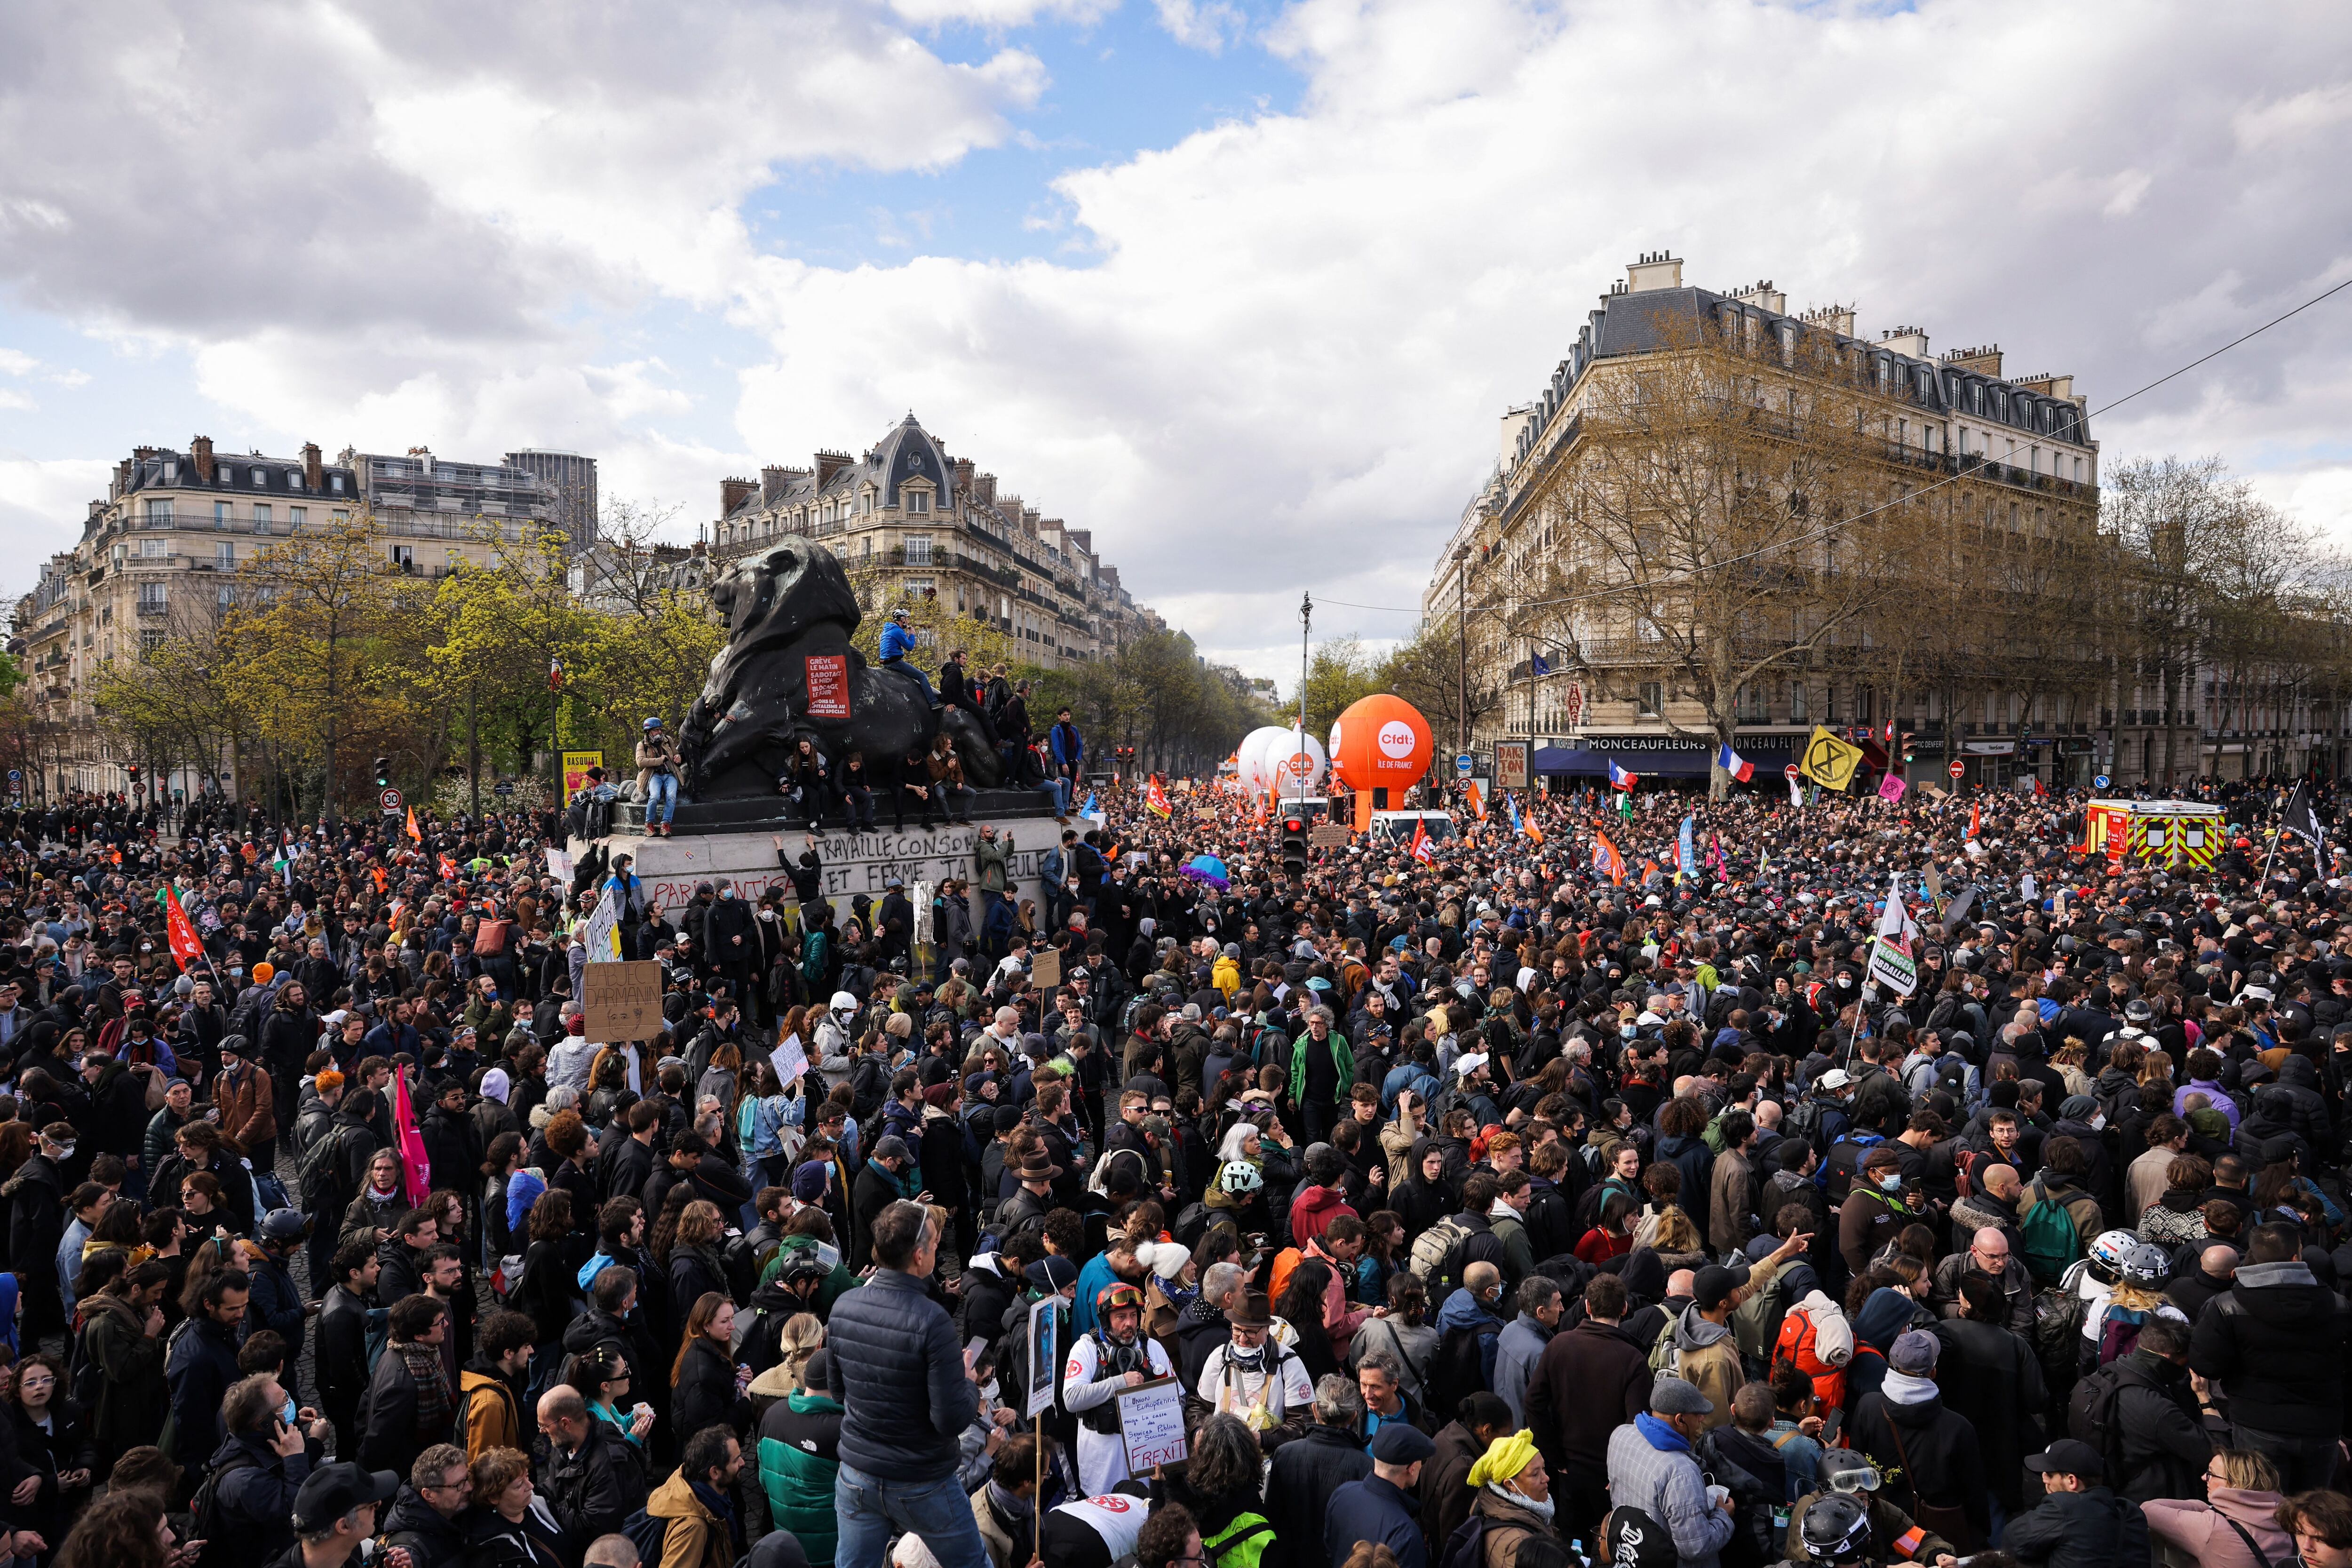 France experiences last protests before key decision on pension reform